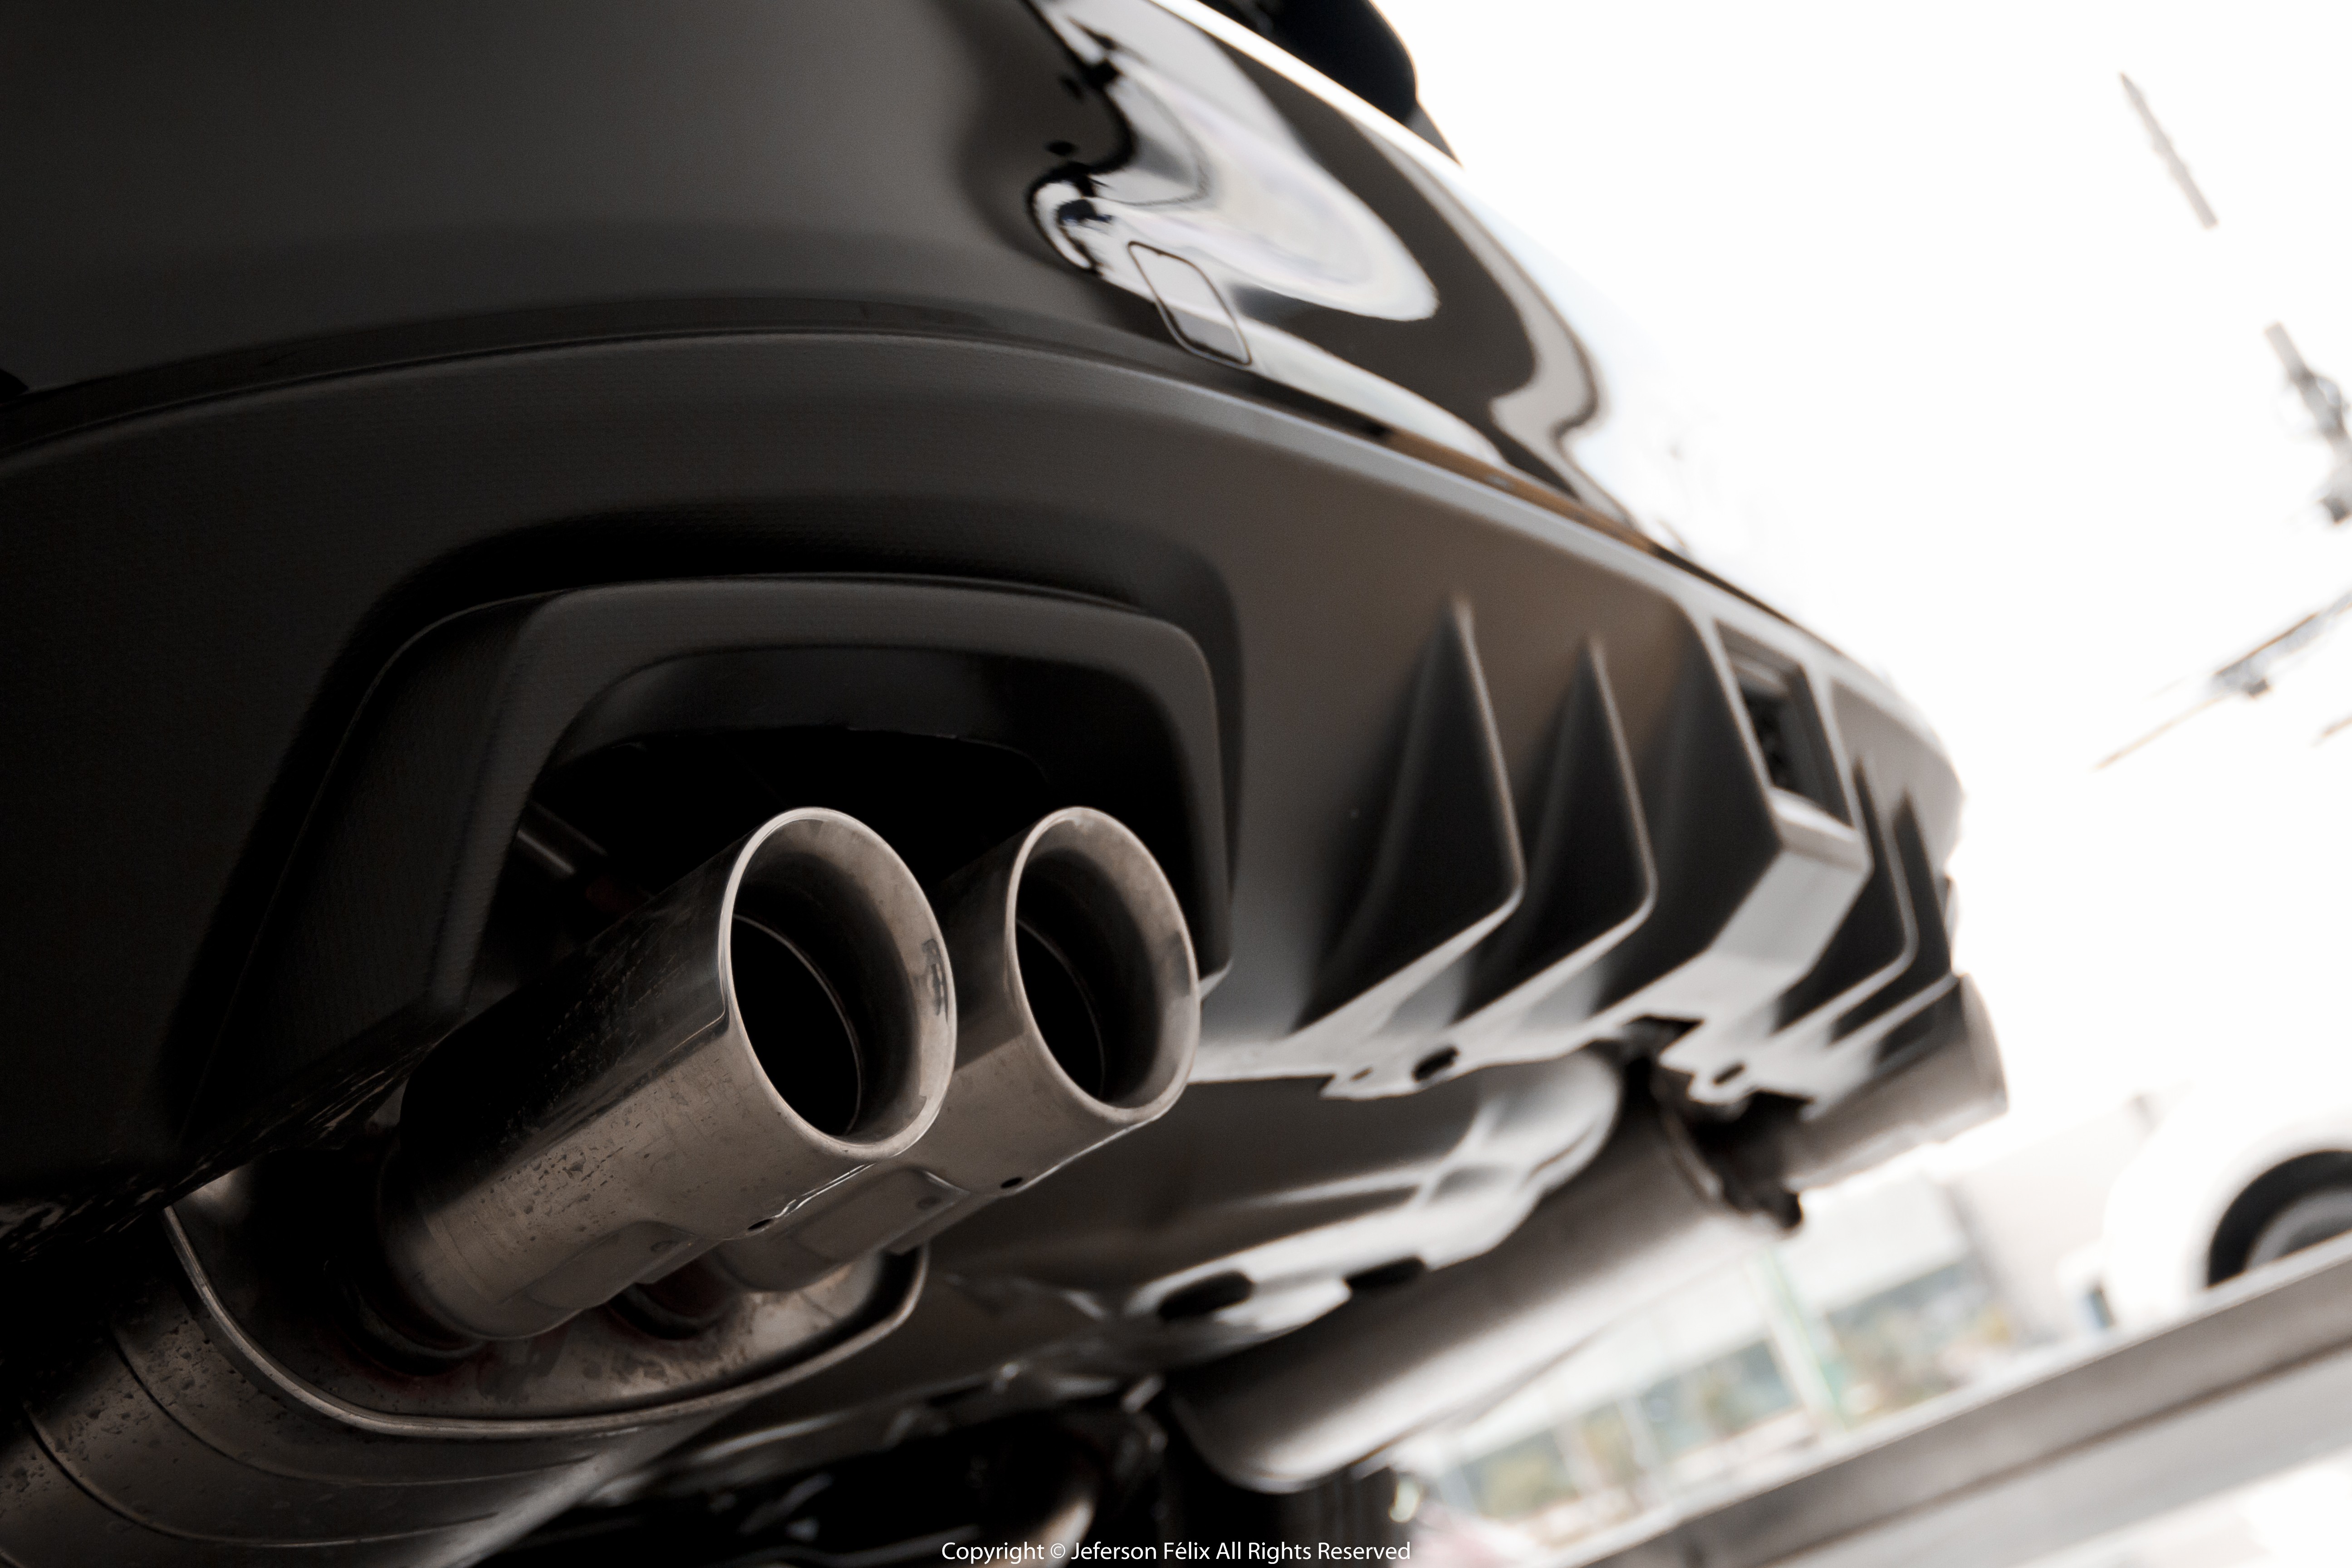 Exhaust Pipes 5184x3456